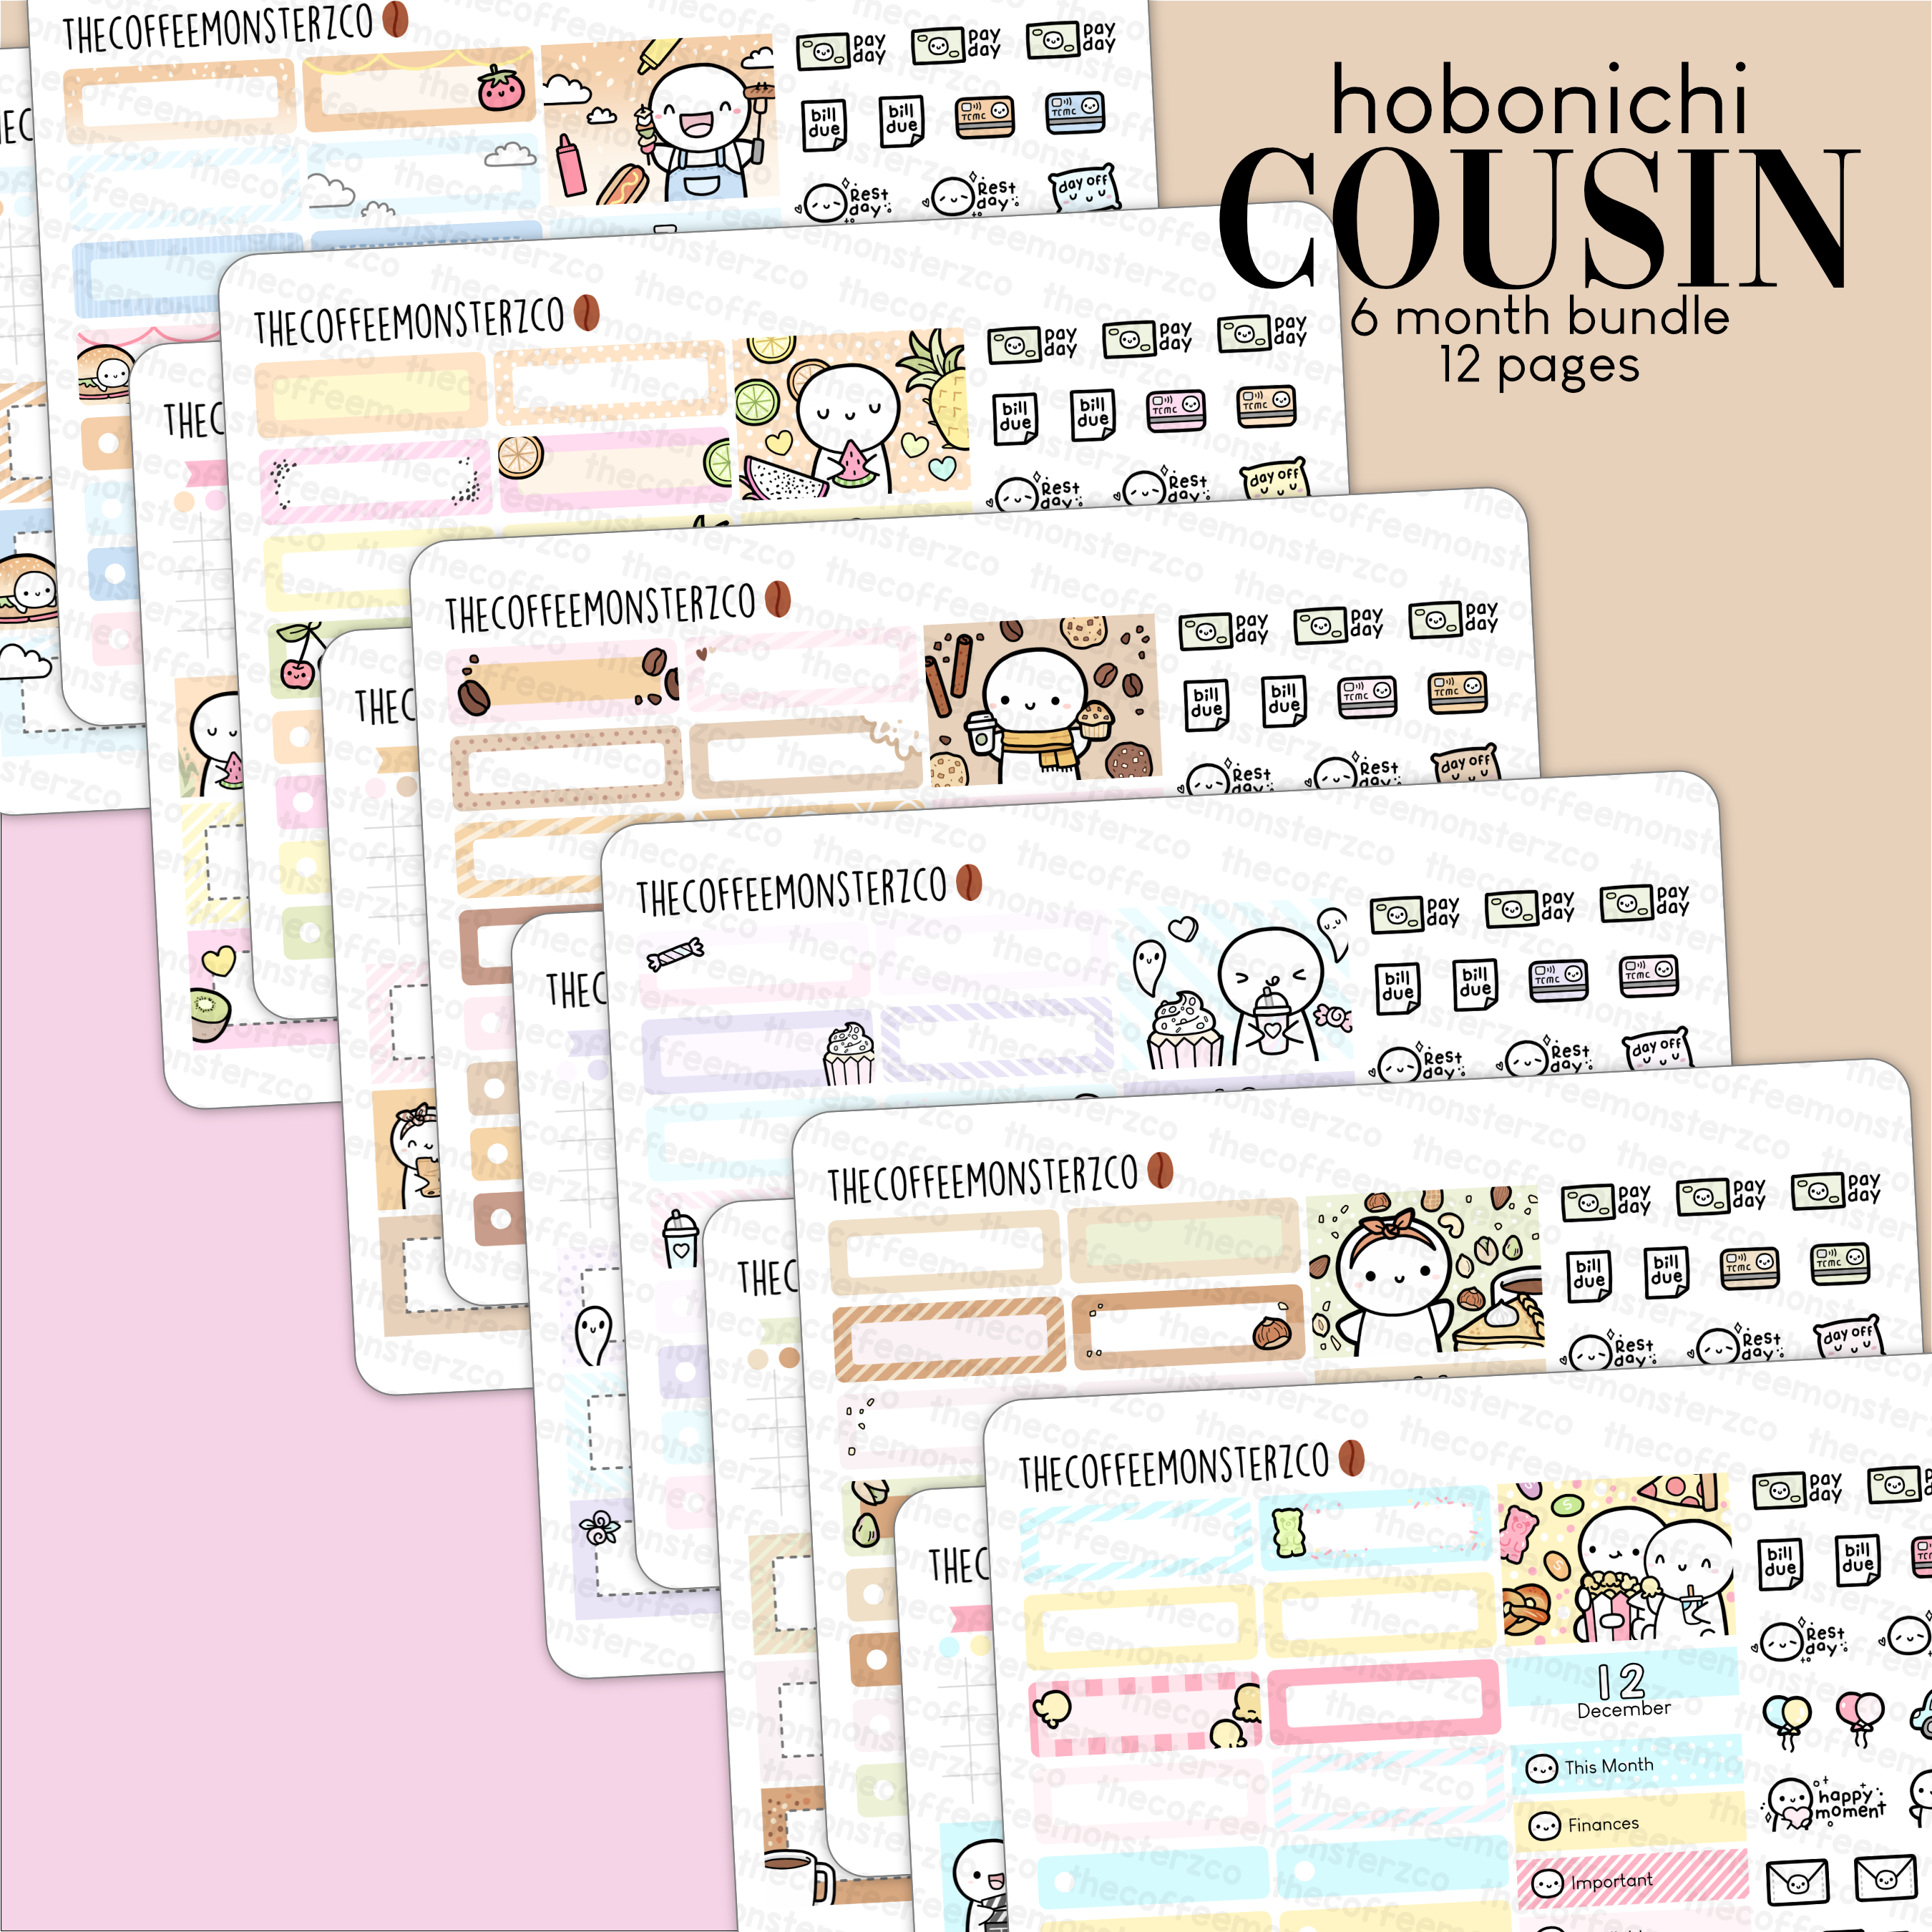 2024 Hobonichi Cousin Monthly Kits - Part 1 – TheCoffeeMonsterzCo